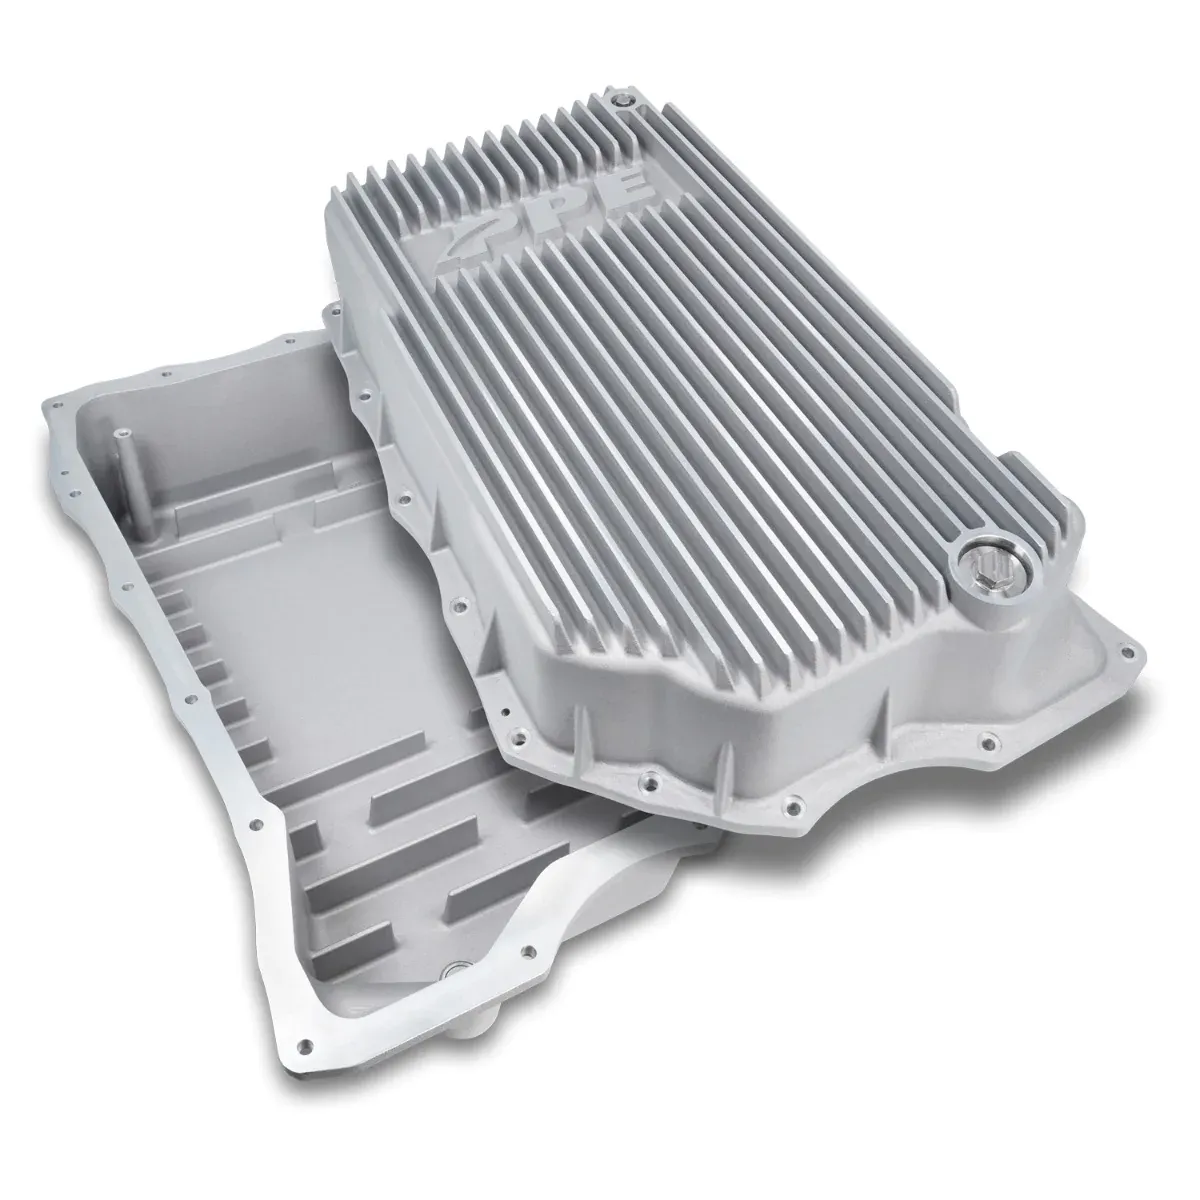 PPE - PPE Heavy Duty Raw Deep Transmission Pan For 2020+ GM 2500HD/3500HD L5P 10L1000